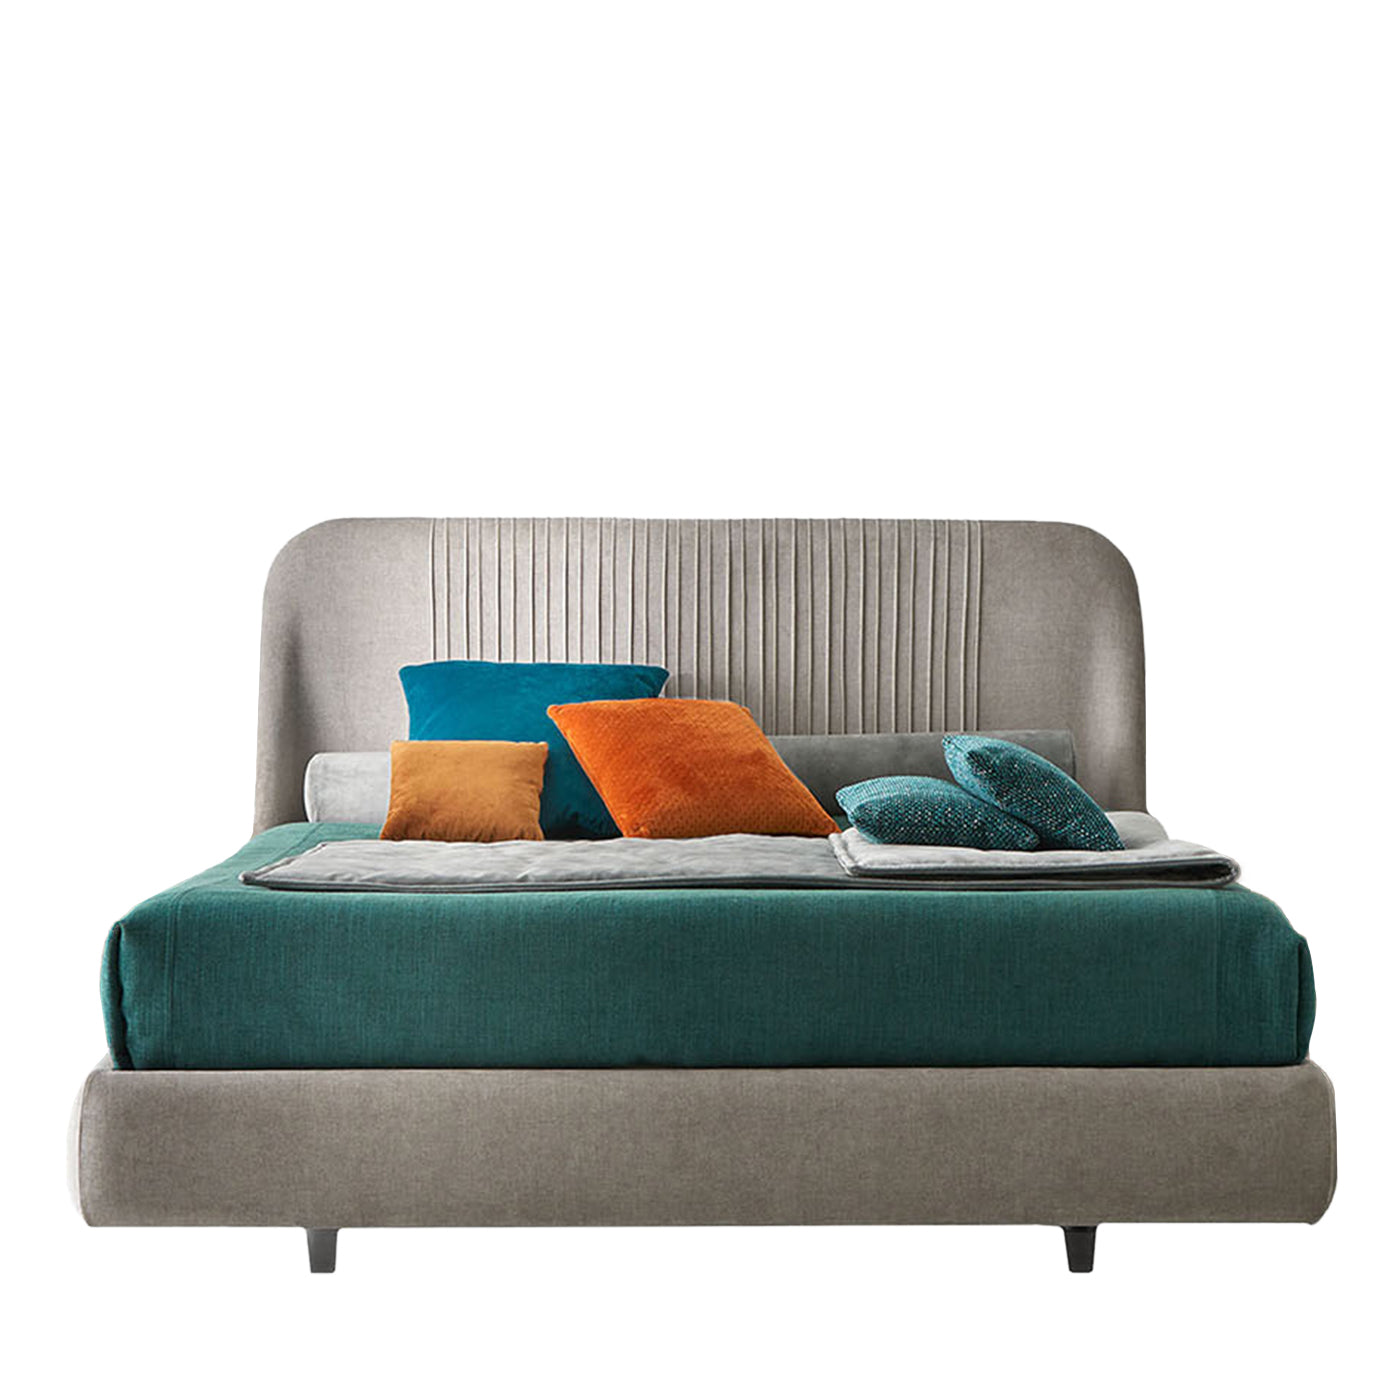 Alba Fluttuante Bed With Deluxe Velvet Upholstery - Vue principale